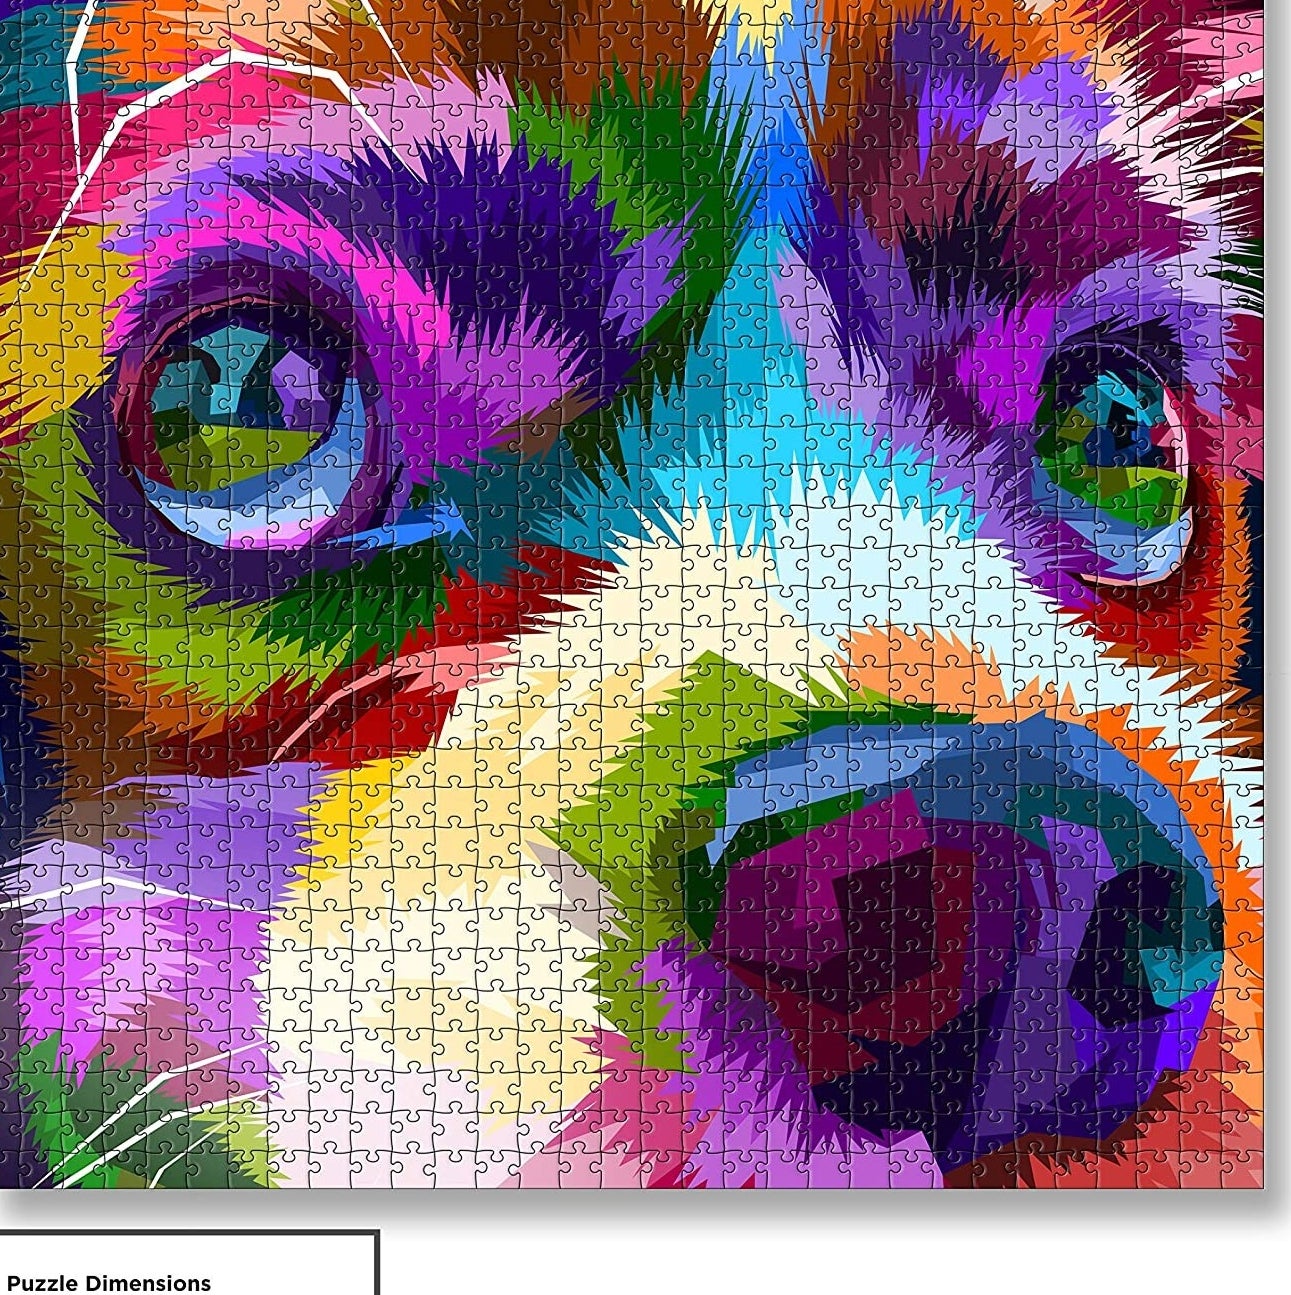 The 1,000 piece puzzle of an illustrated dog&#x27;s face 